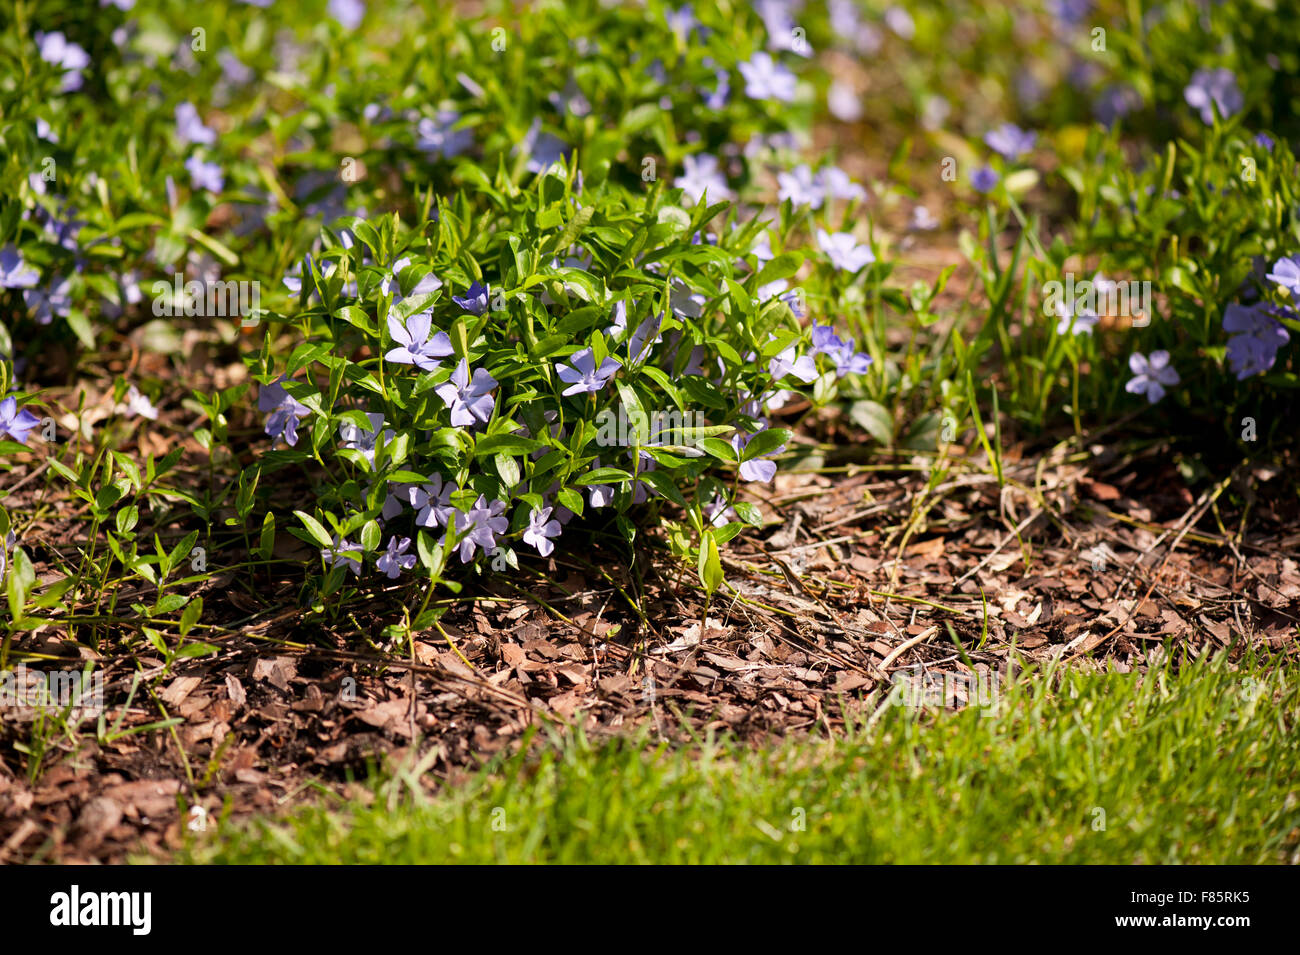 Vinca flowers garden bedding, Apocynaceae family periwinkle or myrtle bright violet purple flowering plants with vibrant ... Stock Photo